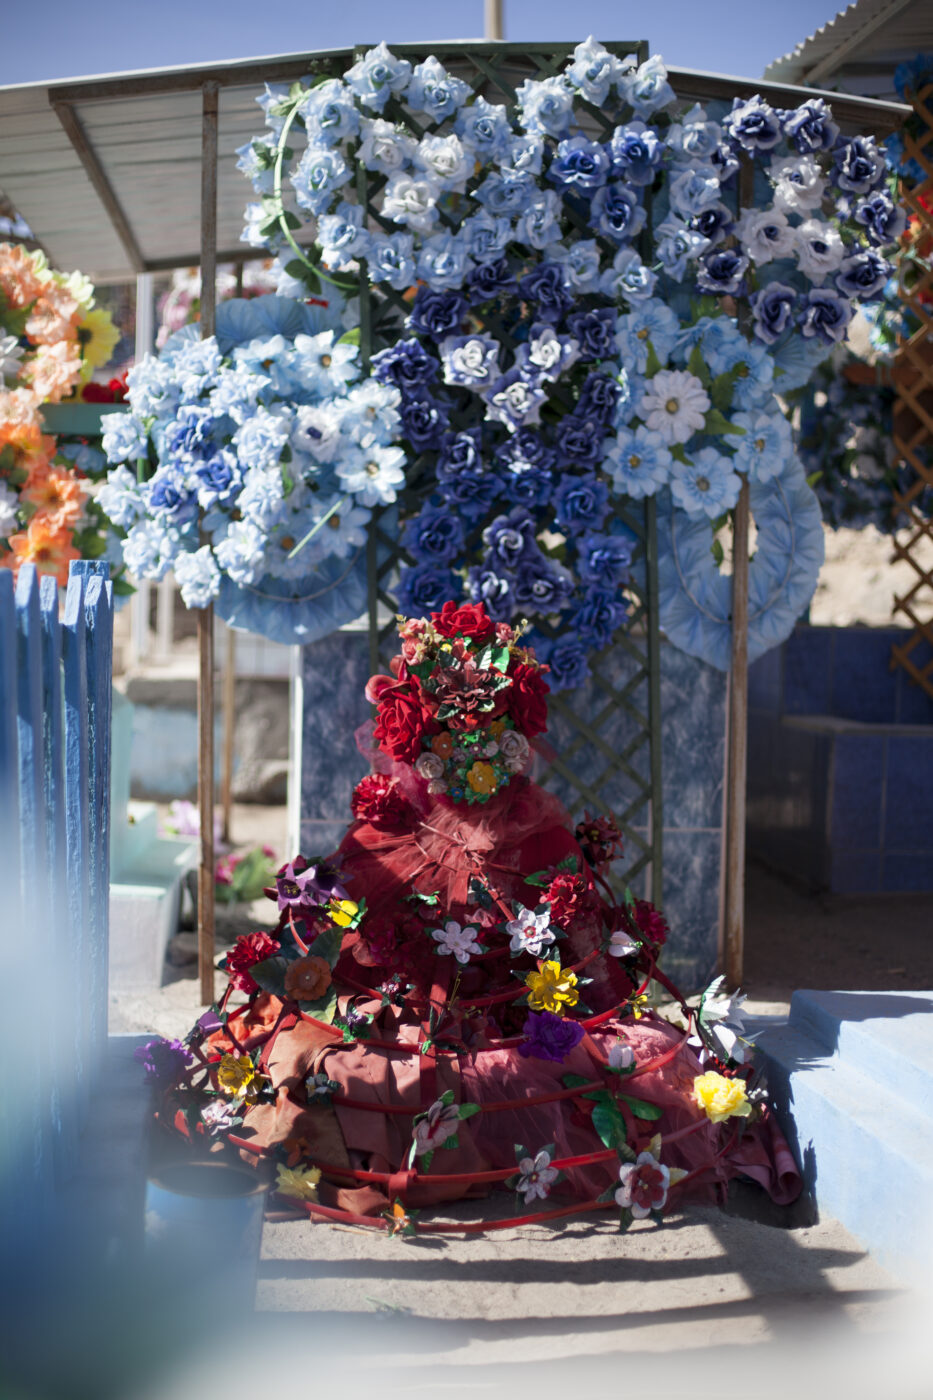 Alma y Muertos. Flower arrangement blues and yellows across the top and a pyramid of red and pink flowers rising from the front middle of the image.